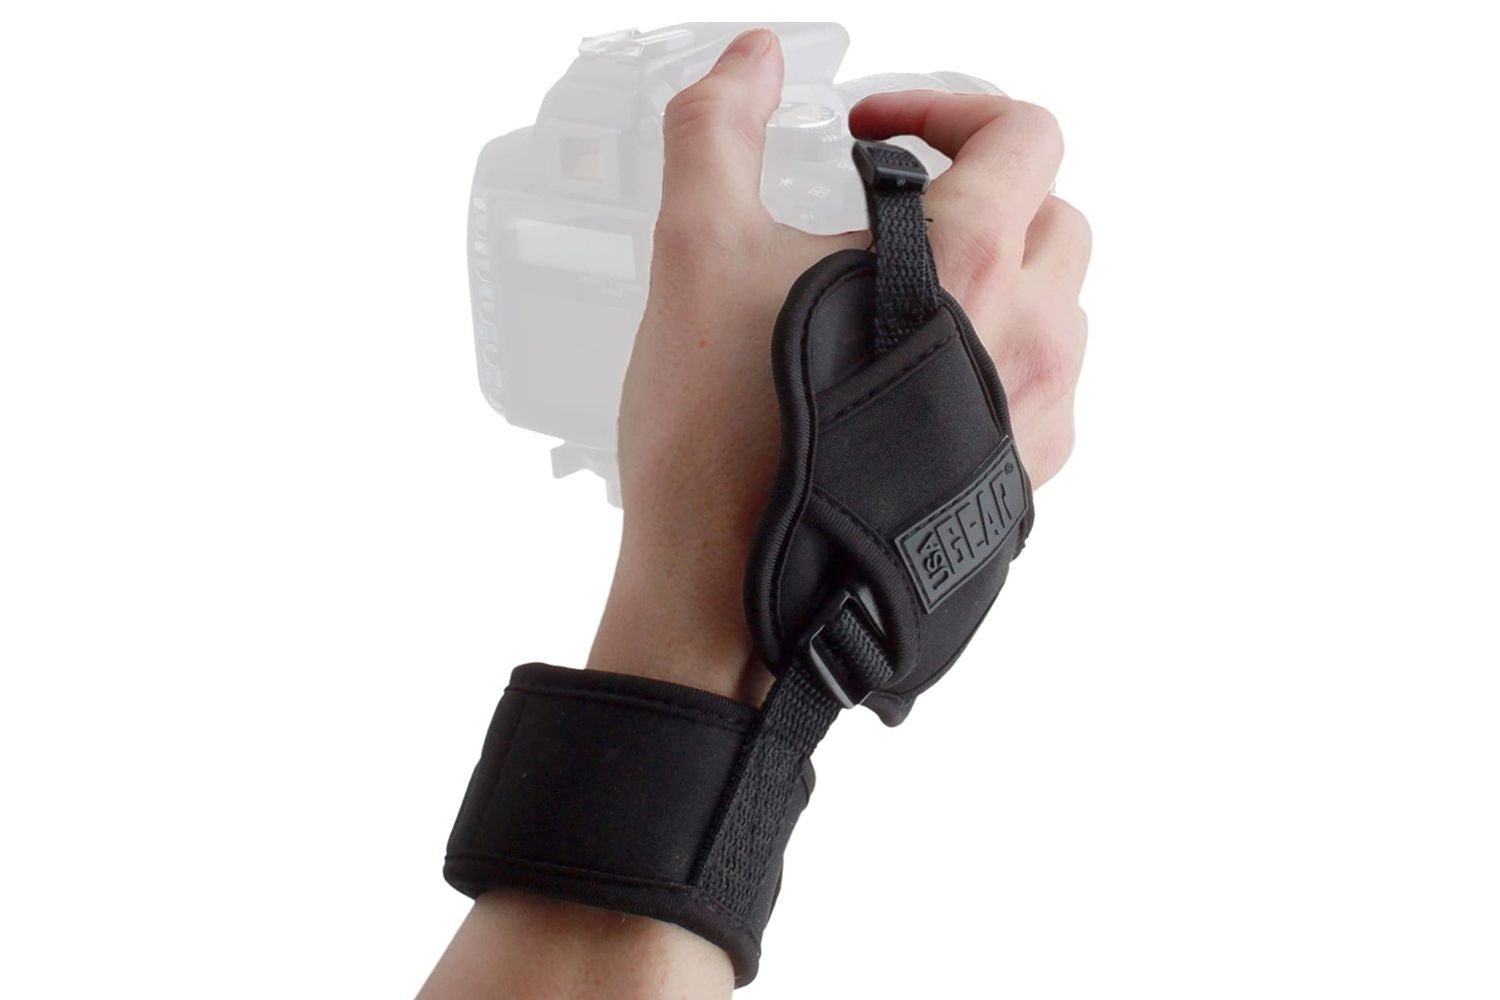 Camera Hand Strap - Rapid Fire Secure Grip Padded Wrist Strap